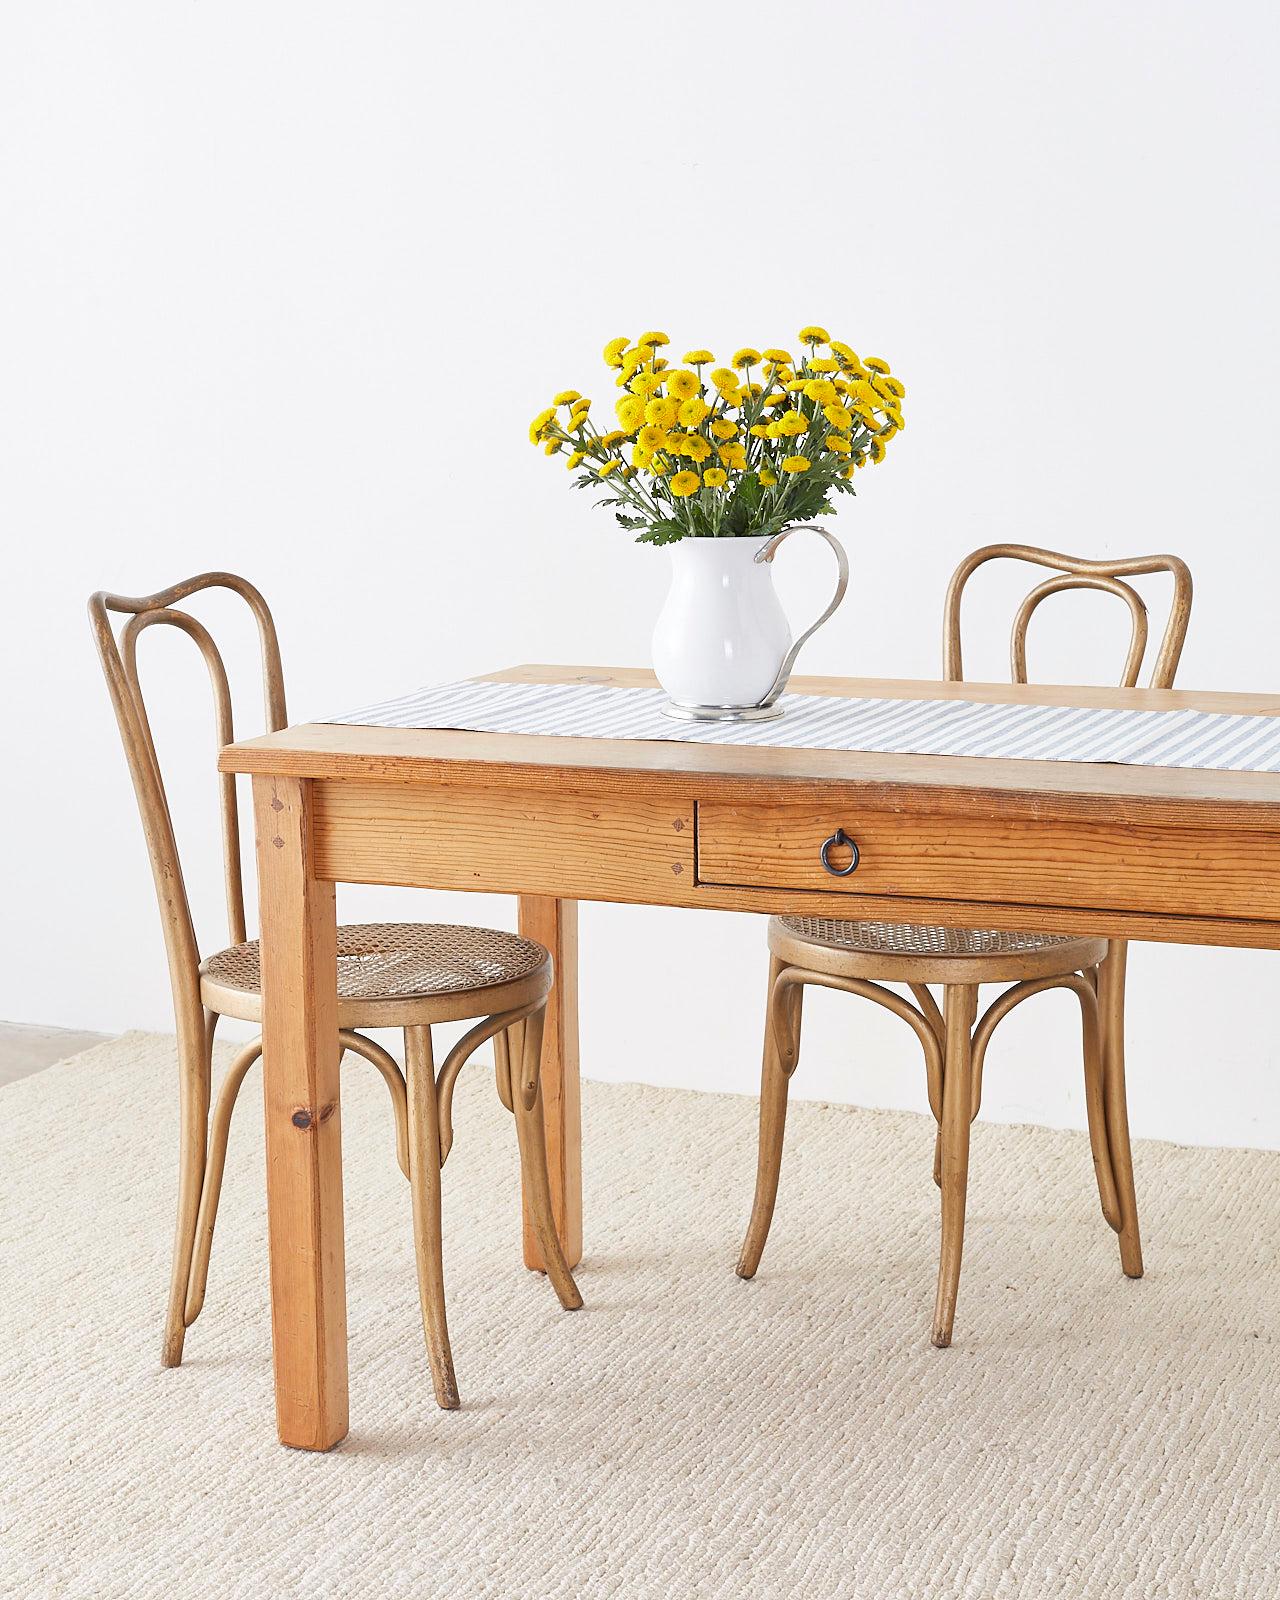 20th Century Rustic American Pine Farmhouse Dining Table